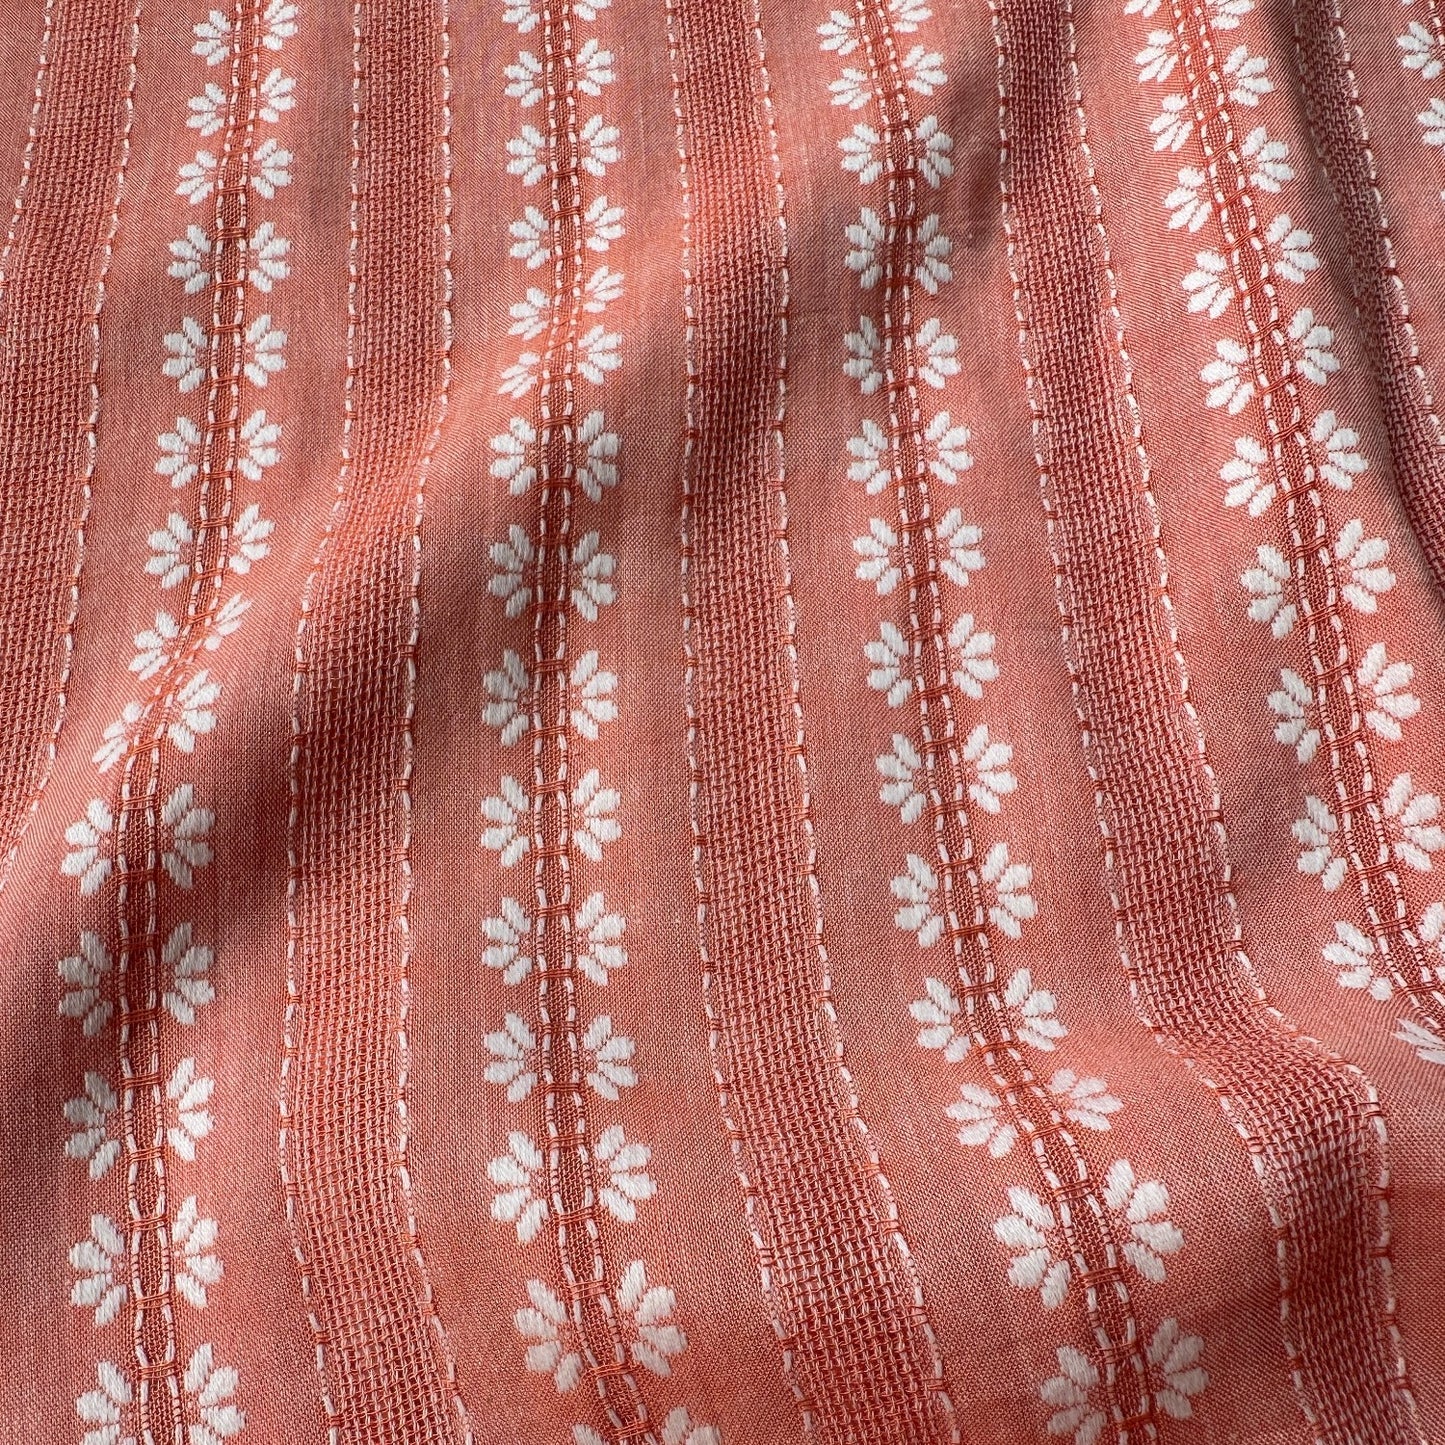 Embroidered Flowers Striped Cotton Rayon Fabric in Coral